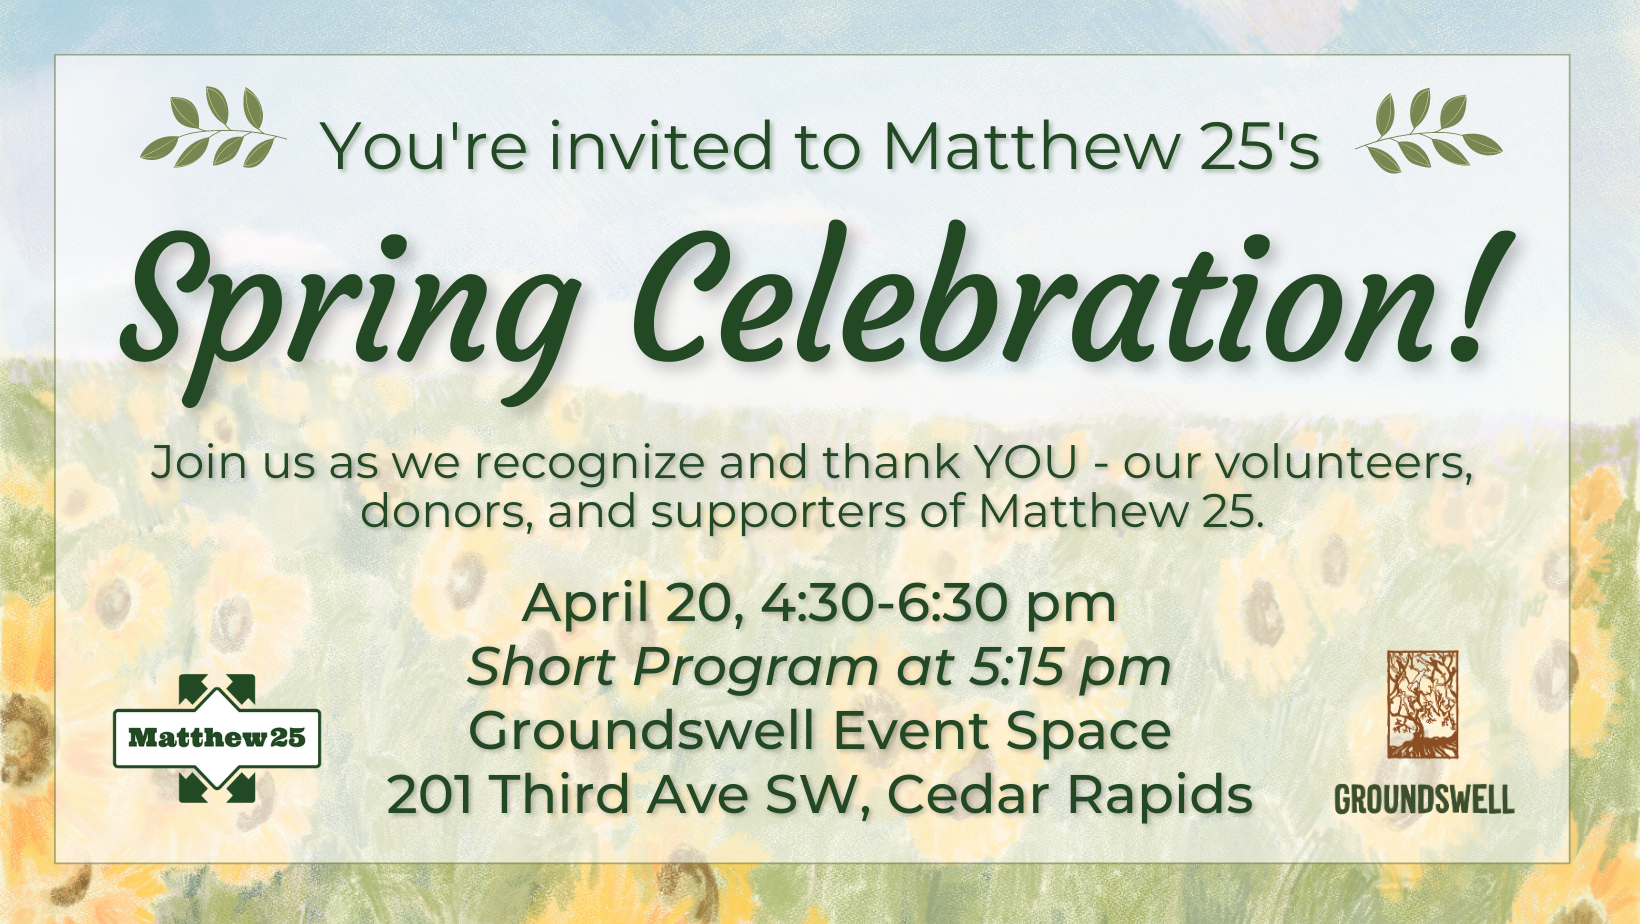 Matthew 25's spring celebration is open to the public from 4:30-6:30 pm on Thursday April 20 at Groundswell Cafe